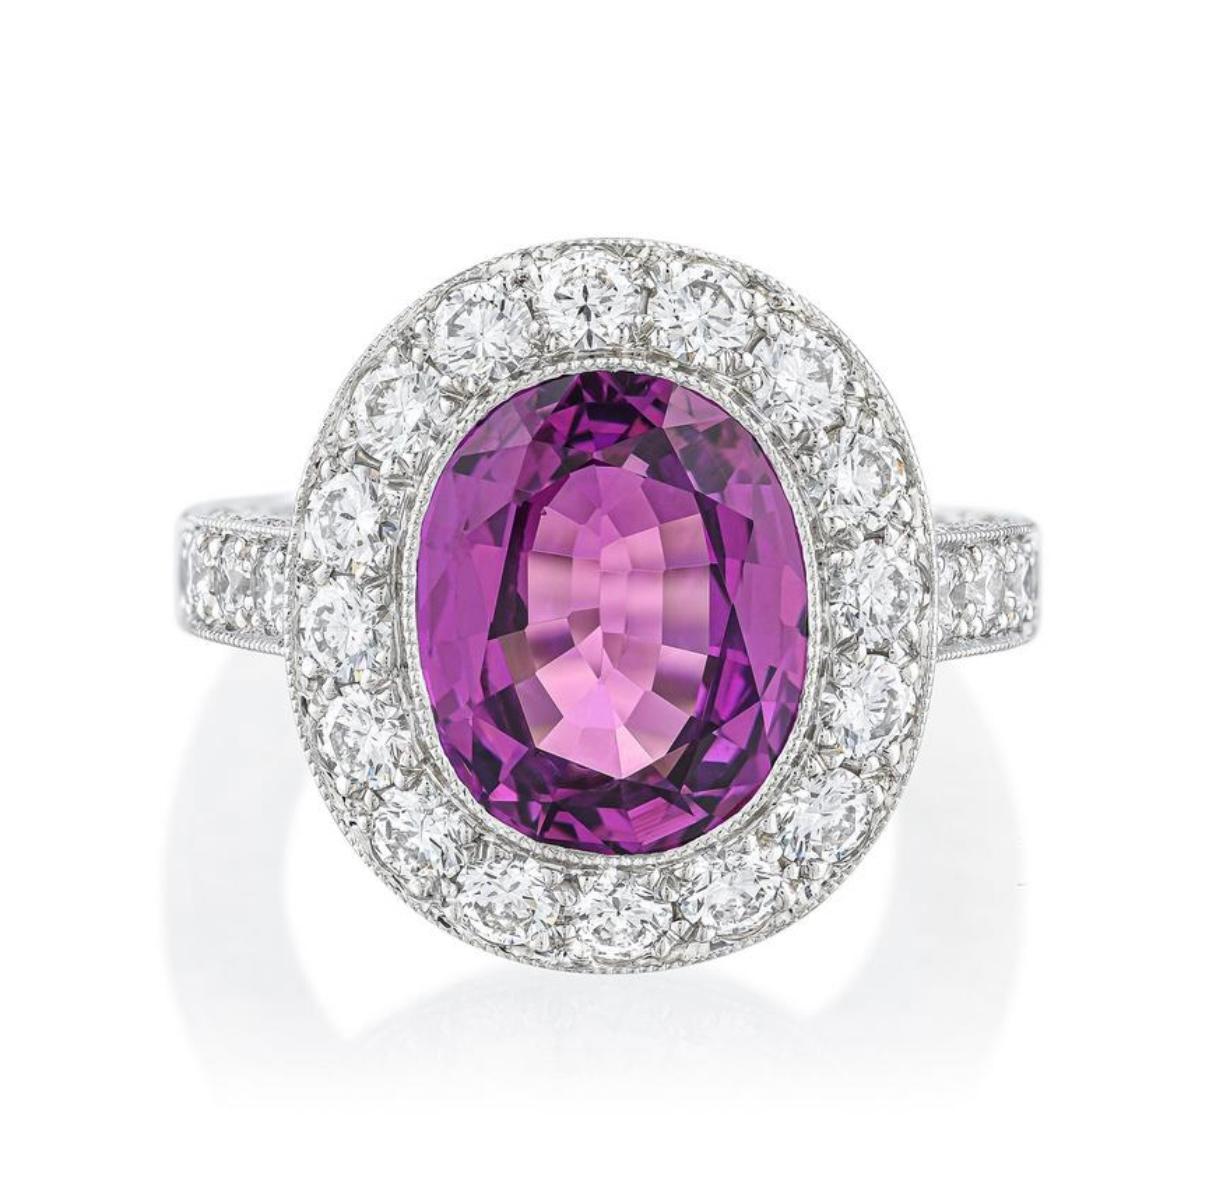 GIA certified purple sapphire and diamond ring crafted in platinum: set with an oval shape faceted purple sapphire, weighing approximately 4.50 carats: accented by round brilliant cut diamonds, weighing a total of approximately 2 carats, most with G